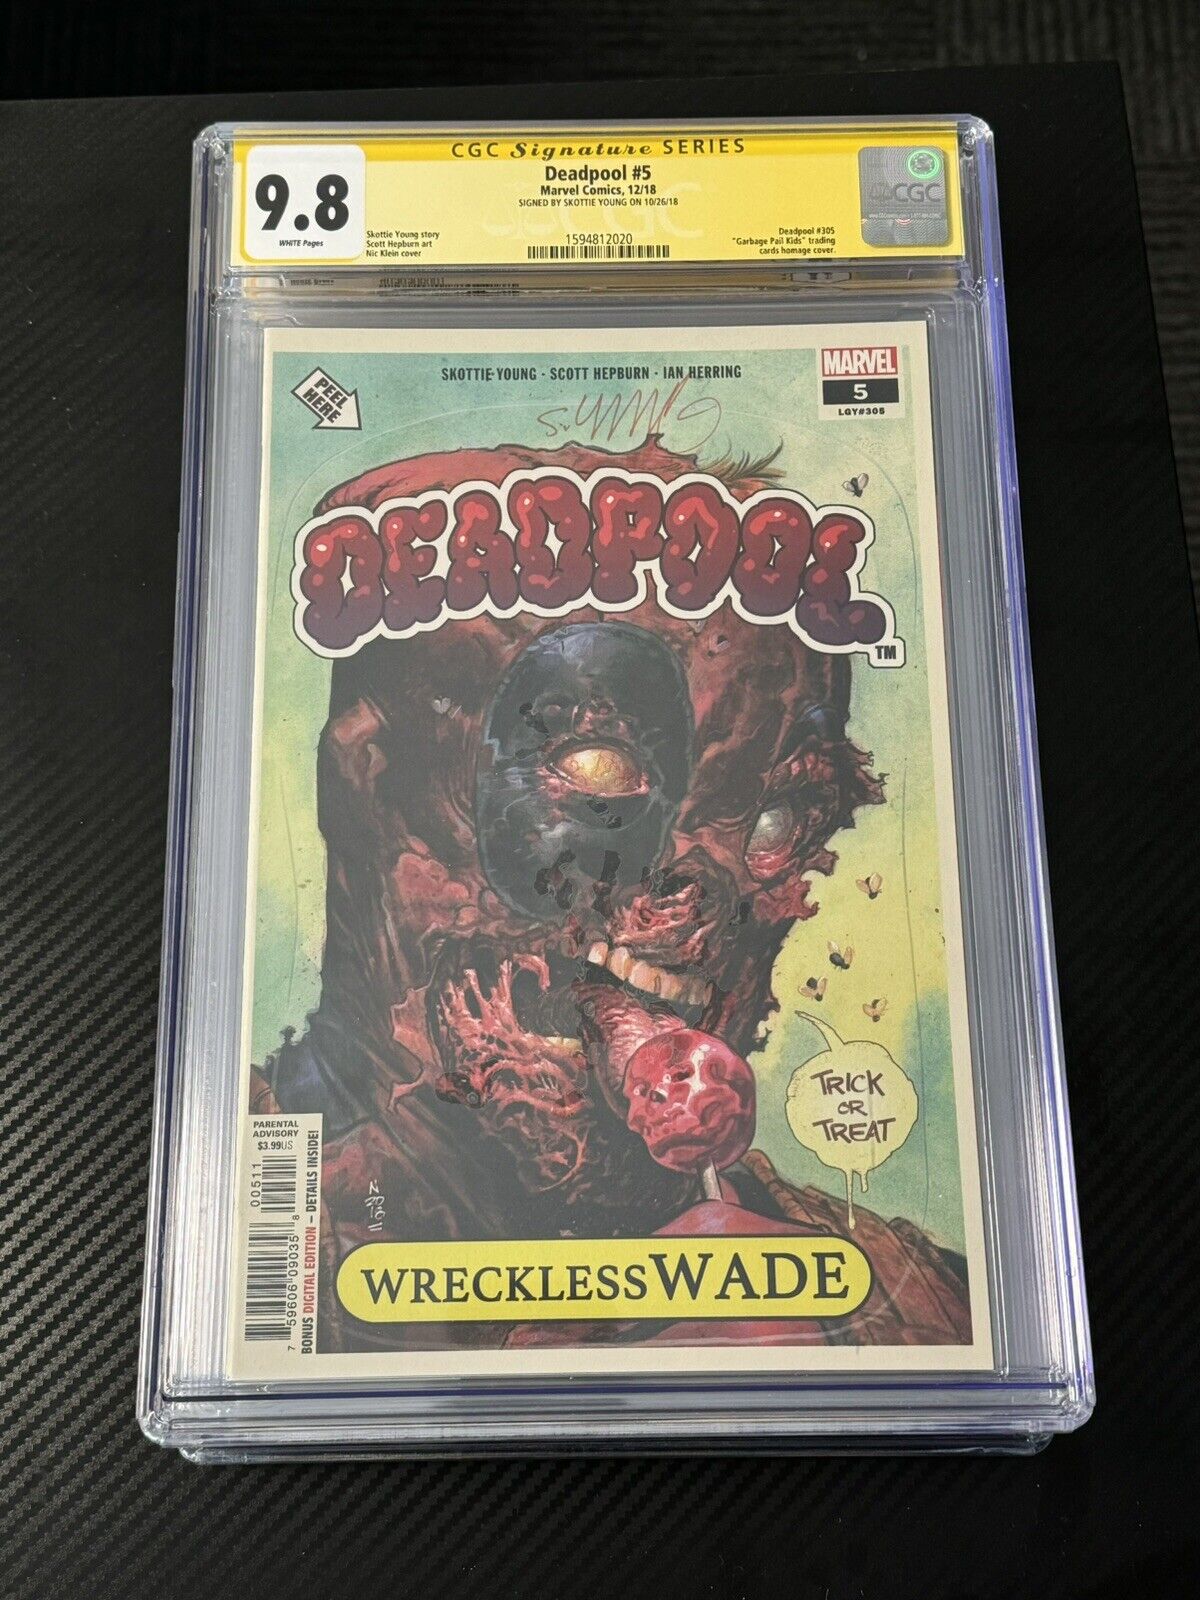 Deadpool #5 CGC 9.8 Signed By Skottie Young Garbage Pail Kids Homage Cover